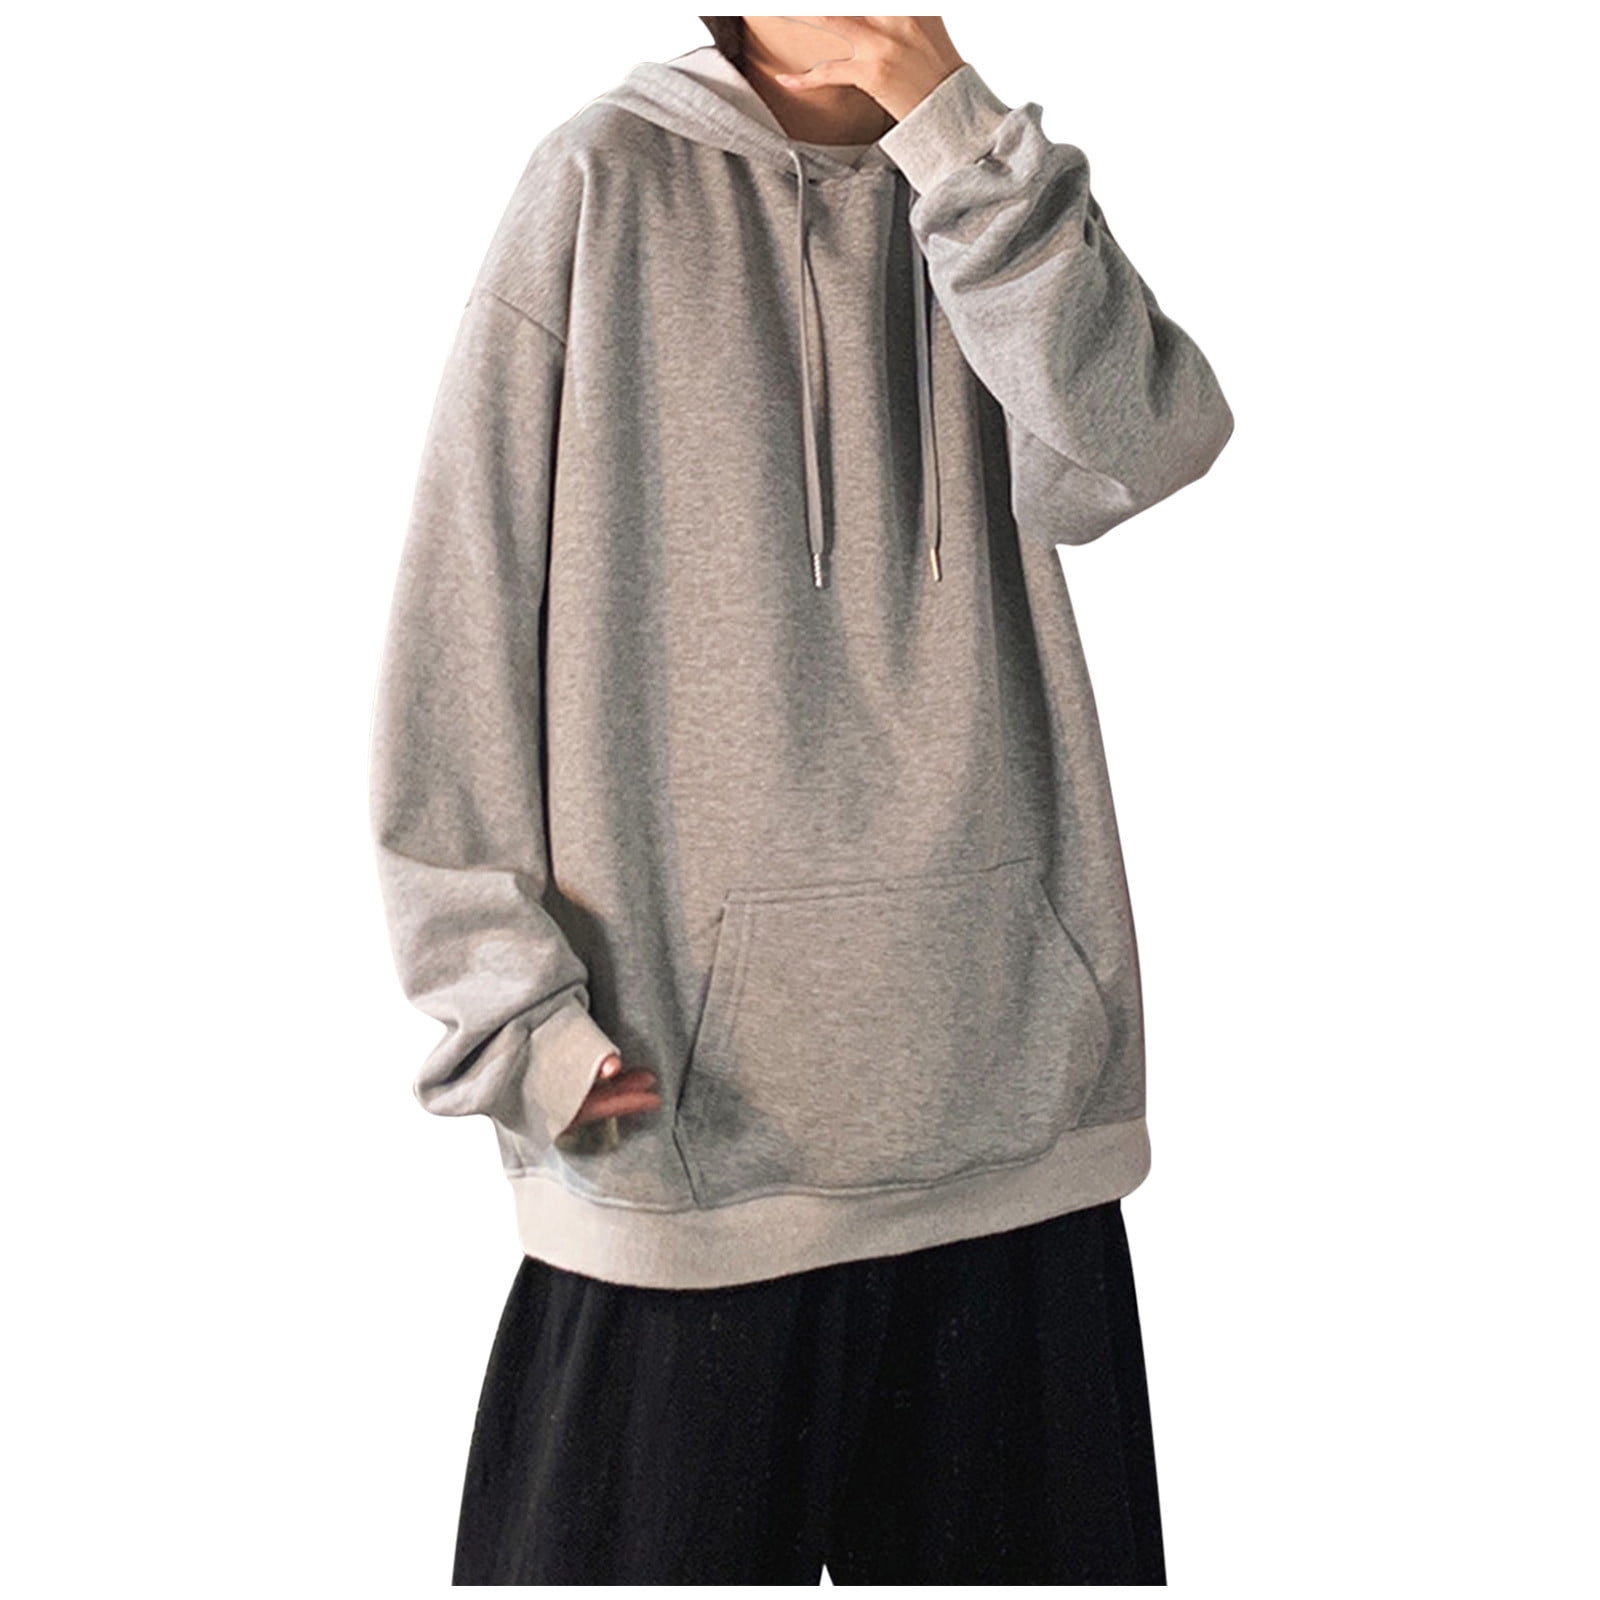 Black Fashion Friday Deals Women's Sweatshirts Today Deals Prime Grey  Sweatshirt Lighten Deals of the Day Solid Stylish Loose Fit Casual Pullover